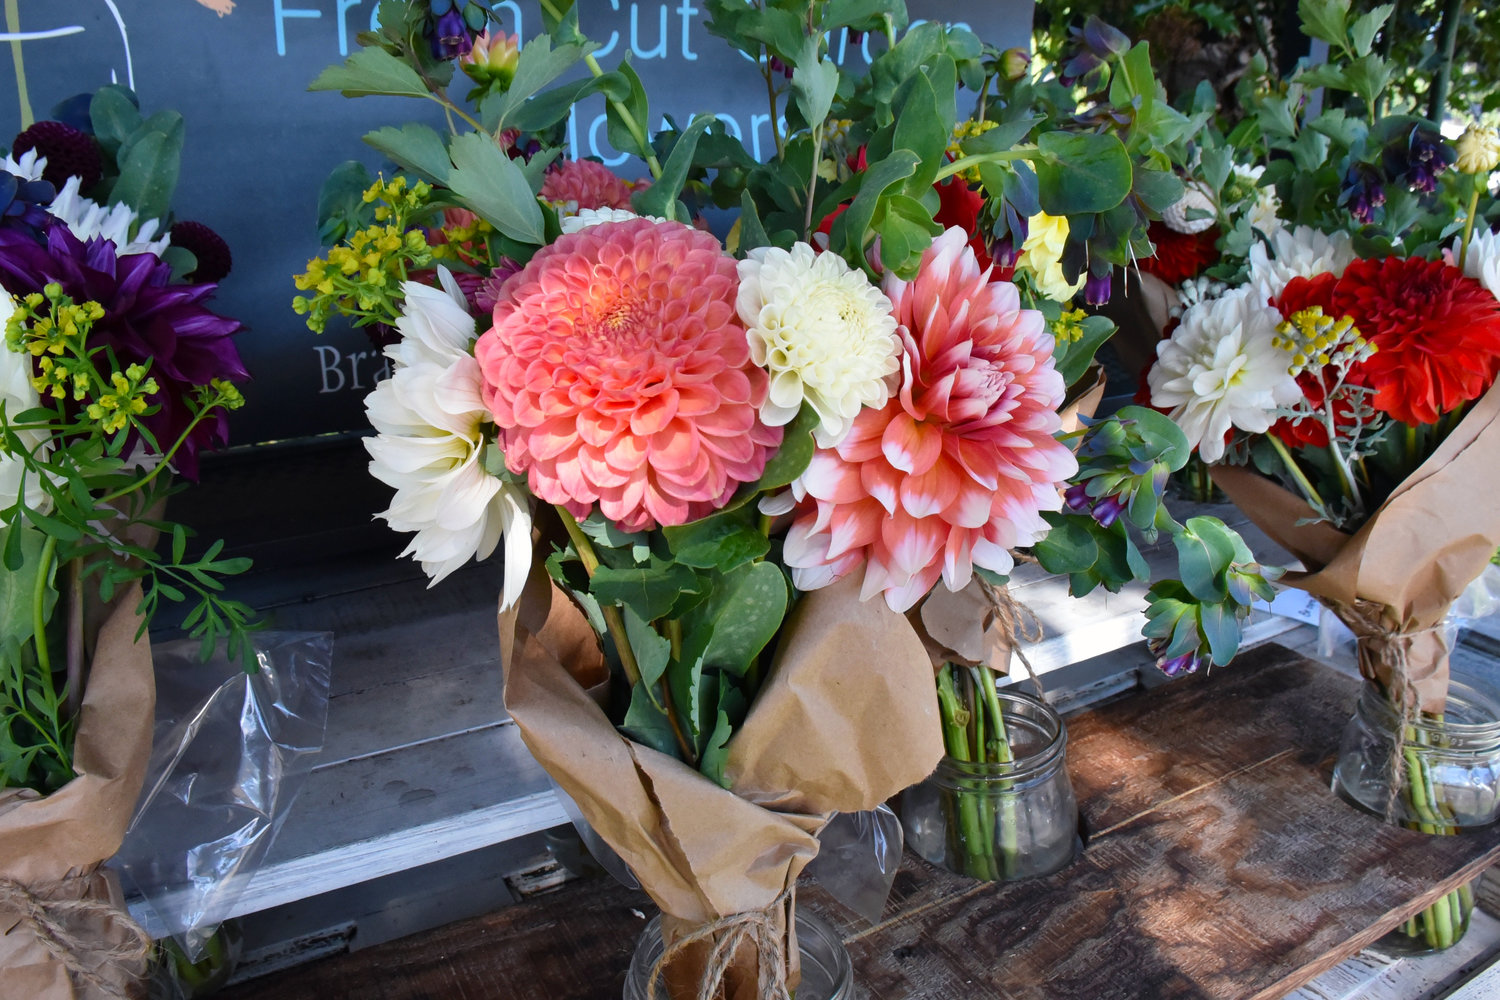 The Braids and Blossoms Flower Farm has bouquets for sale every Friday at 9 a.m. in the summer, located at 396 Sussex Ave. E. in Tenino.